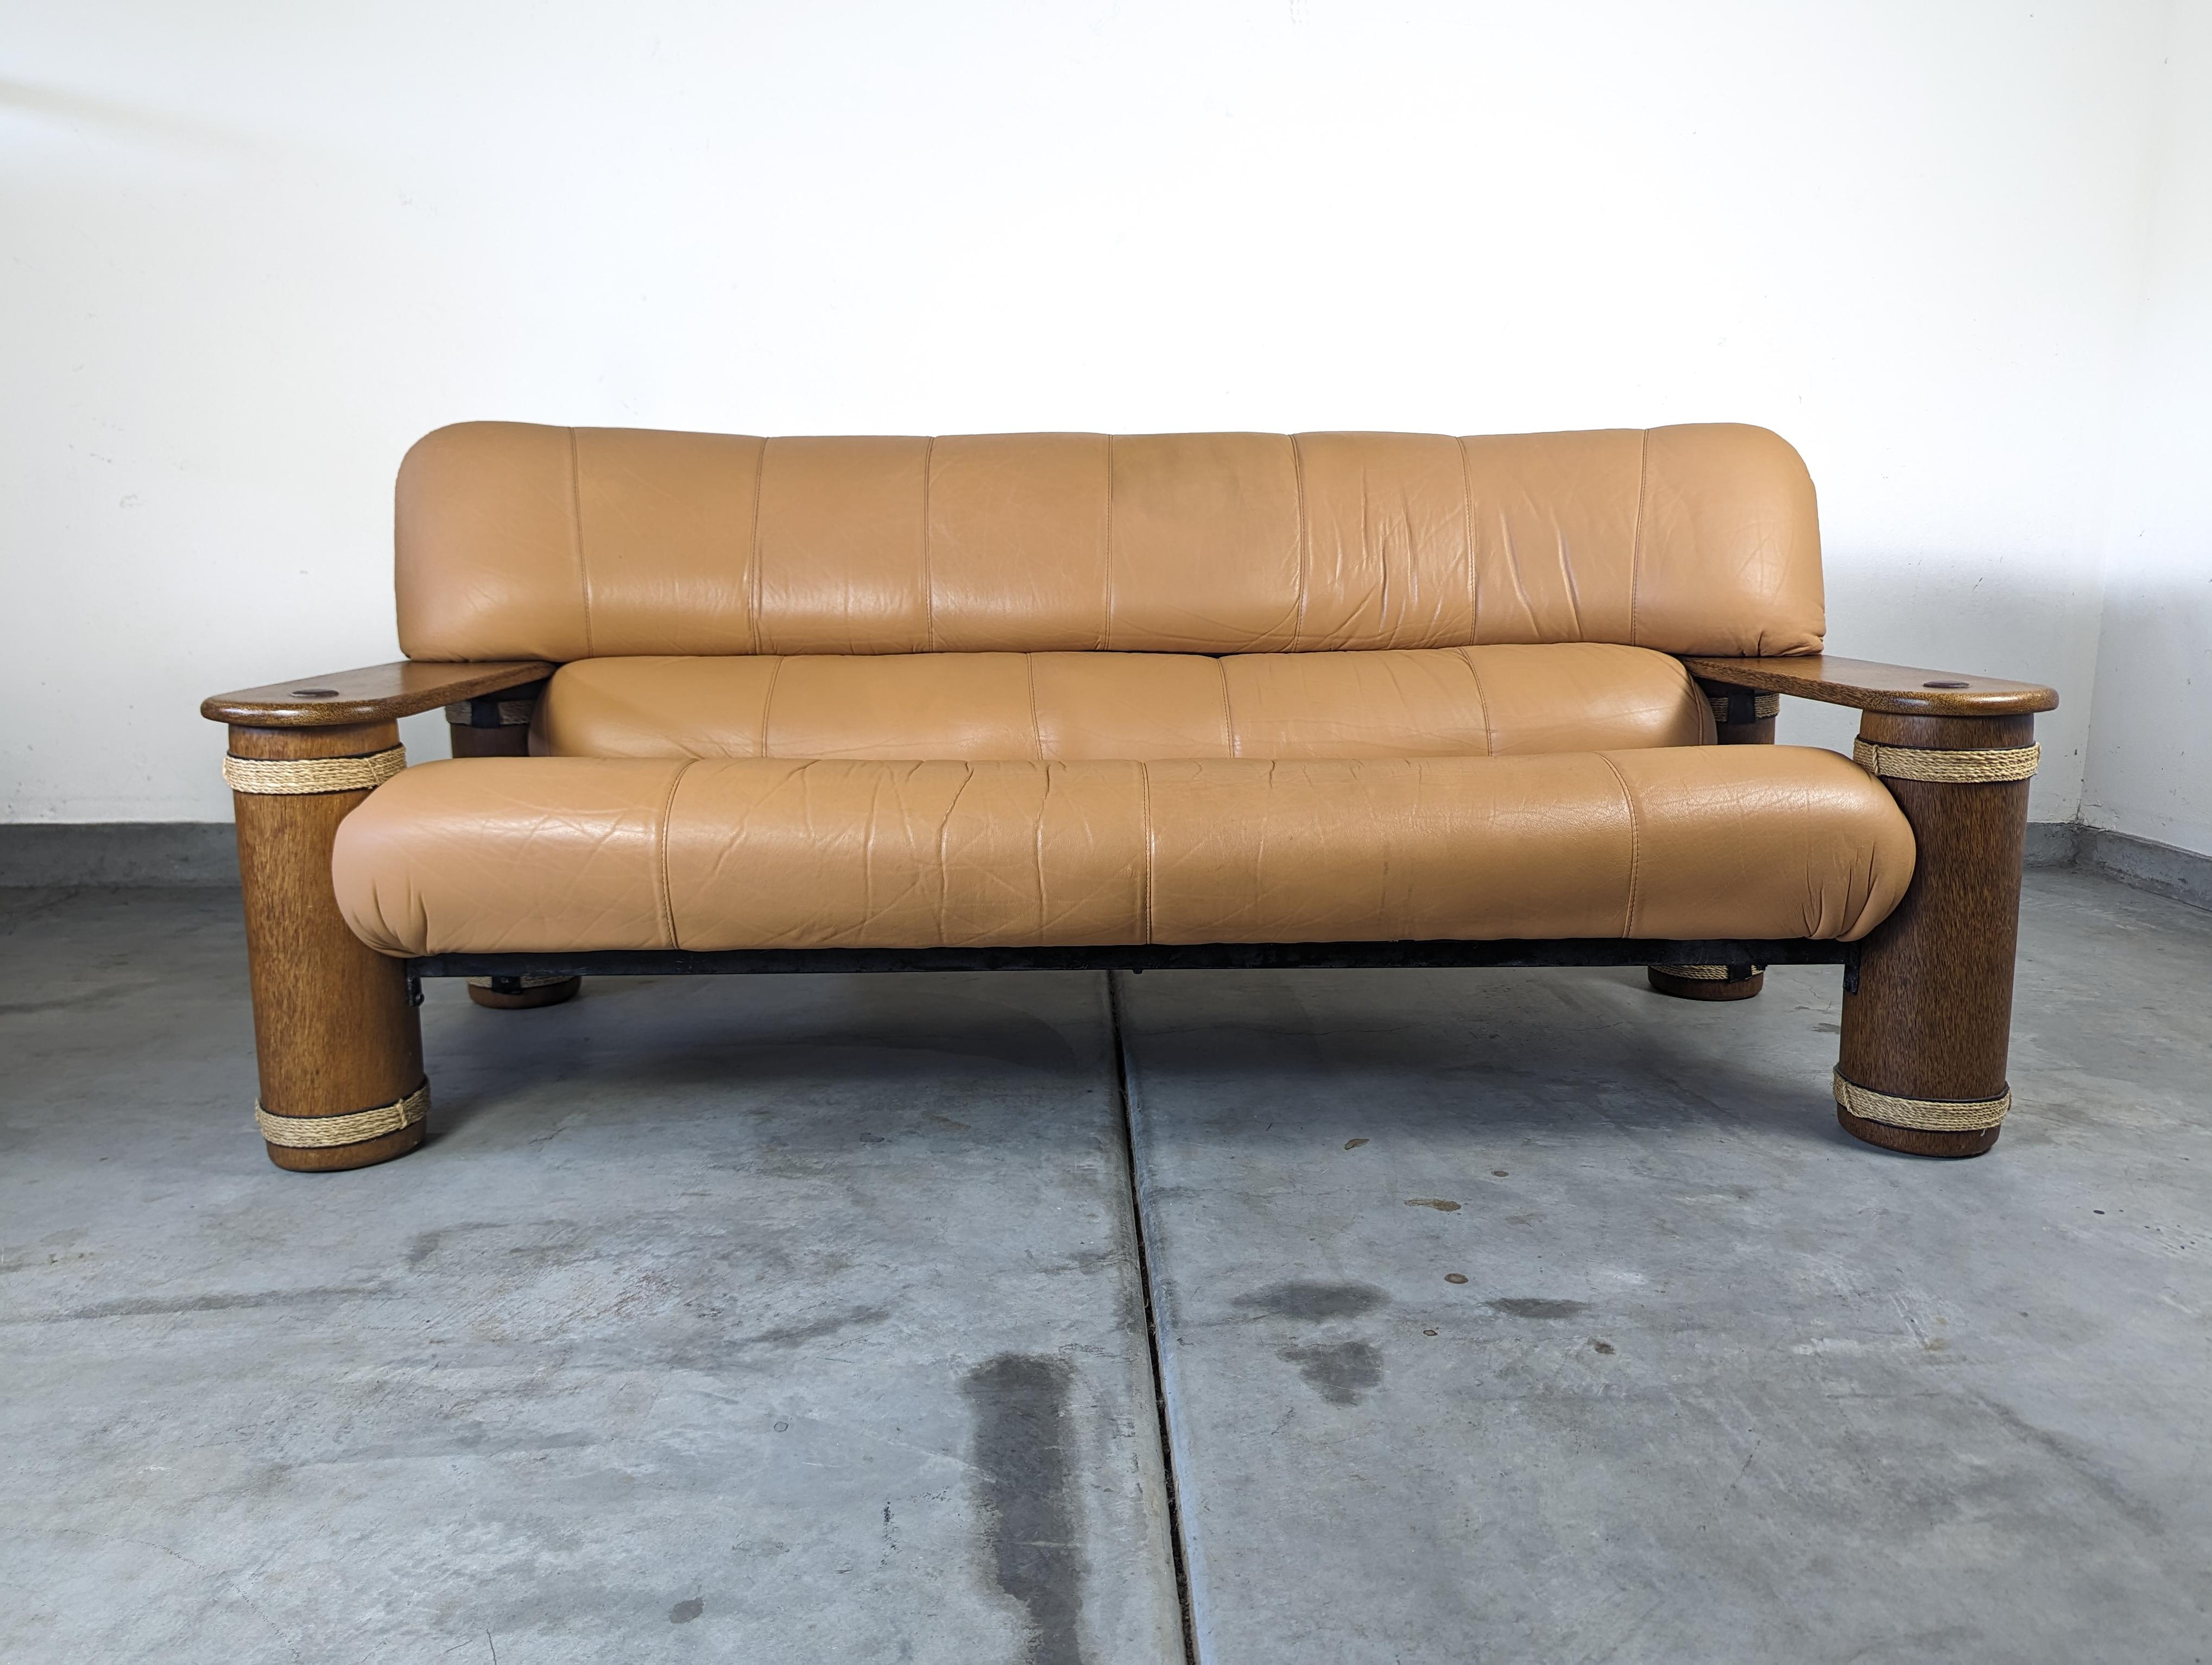 Vintage Leather and Palmwood Three-Seat Sofa by Pacific Green, c1990s For Sale 5